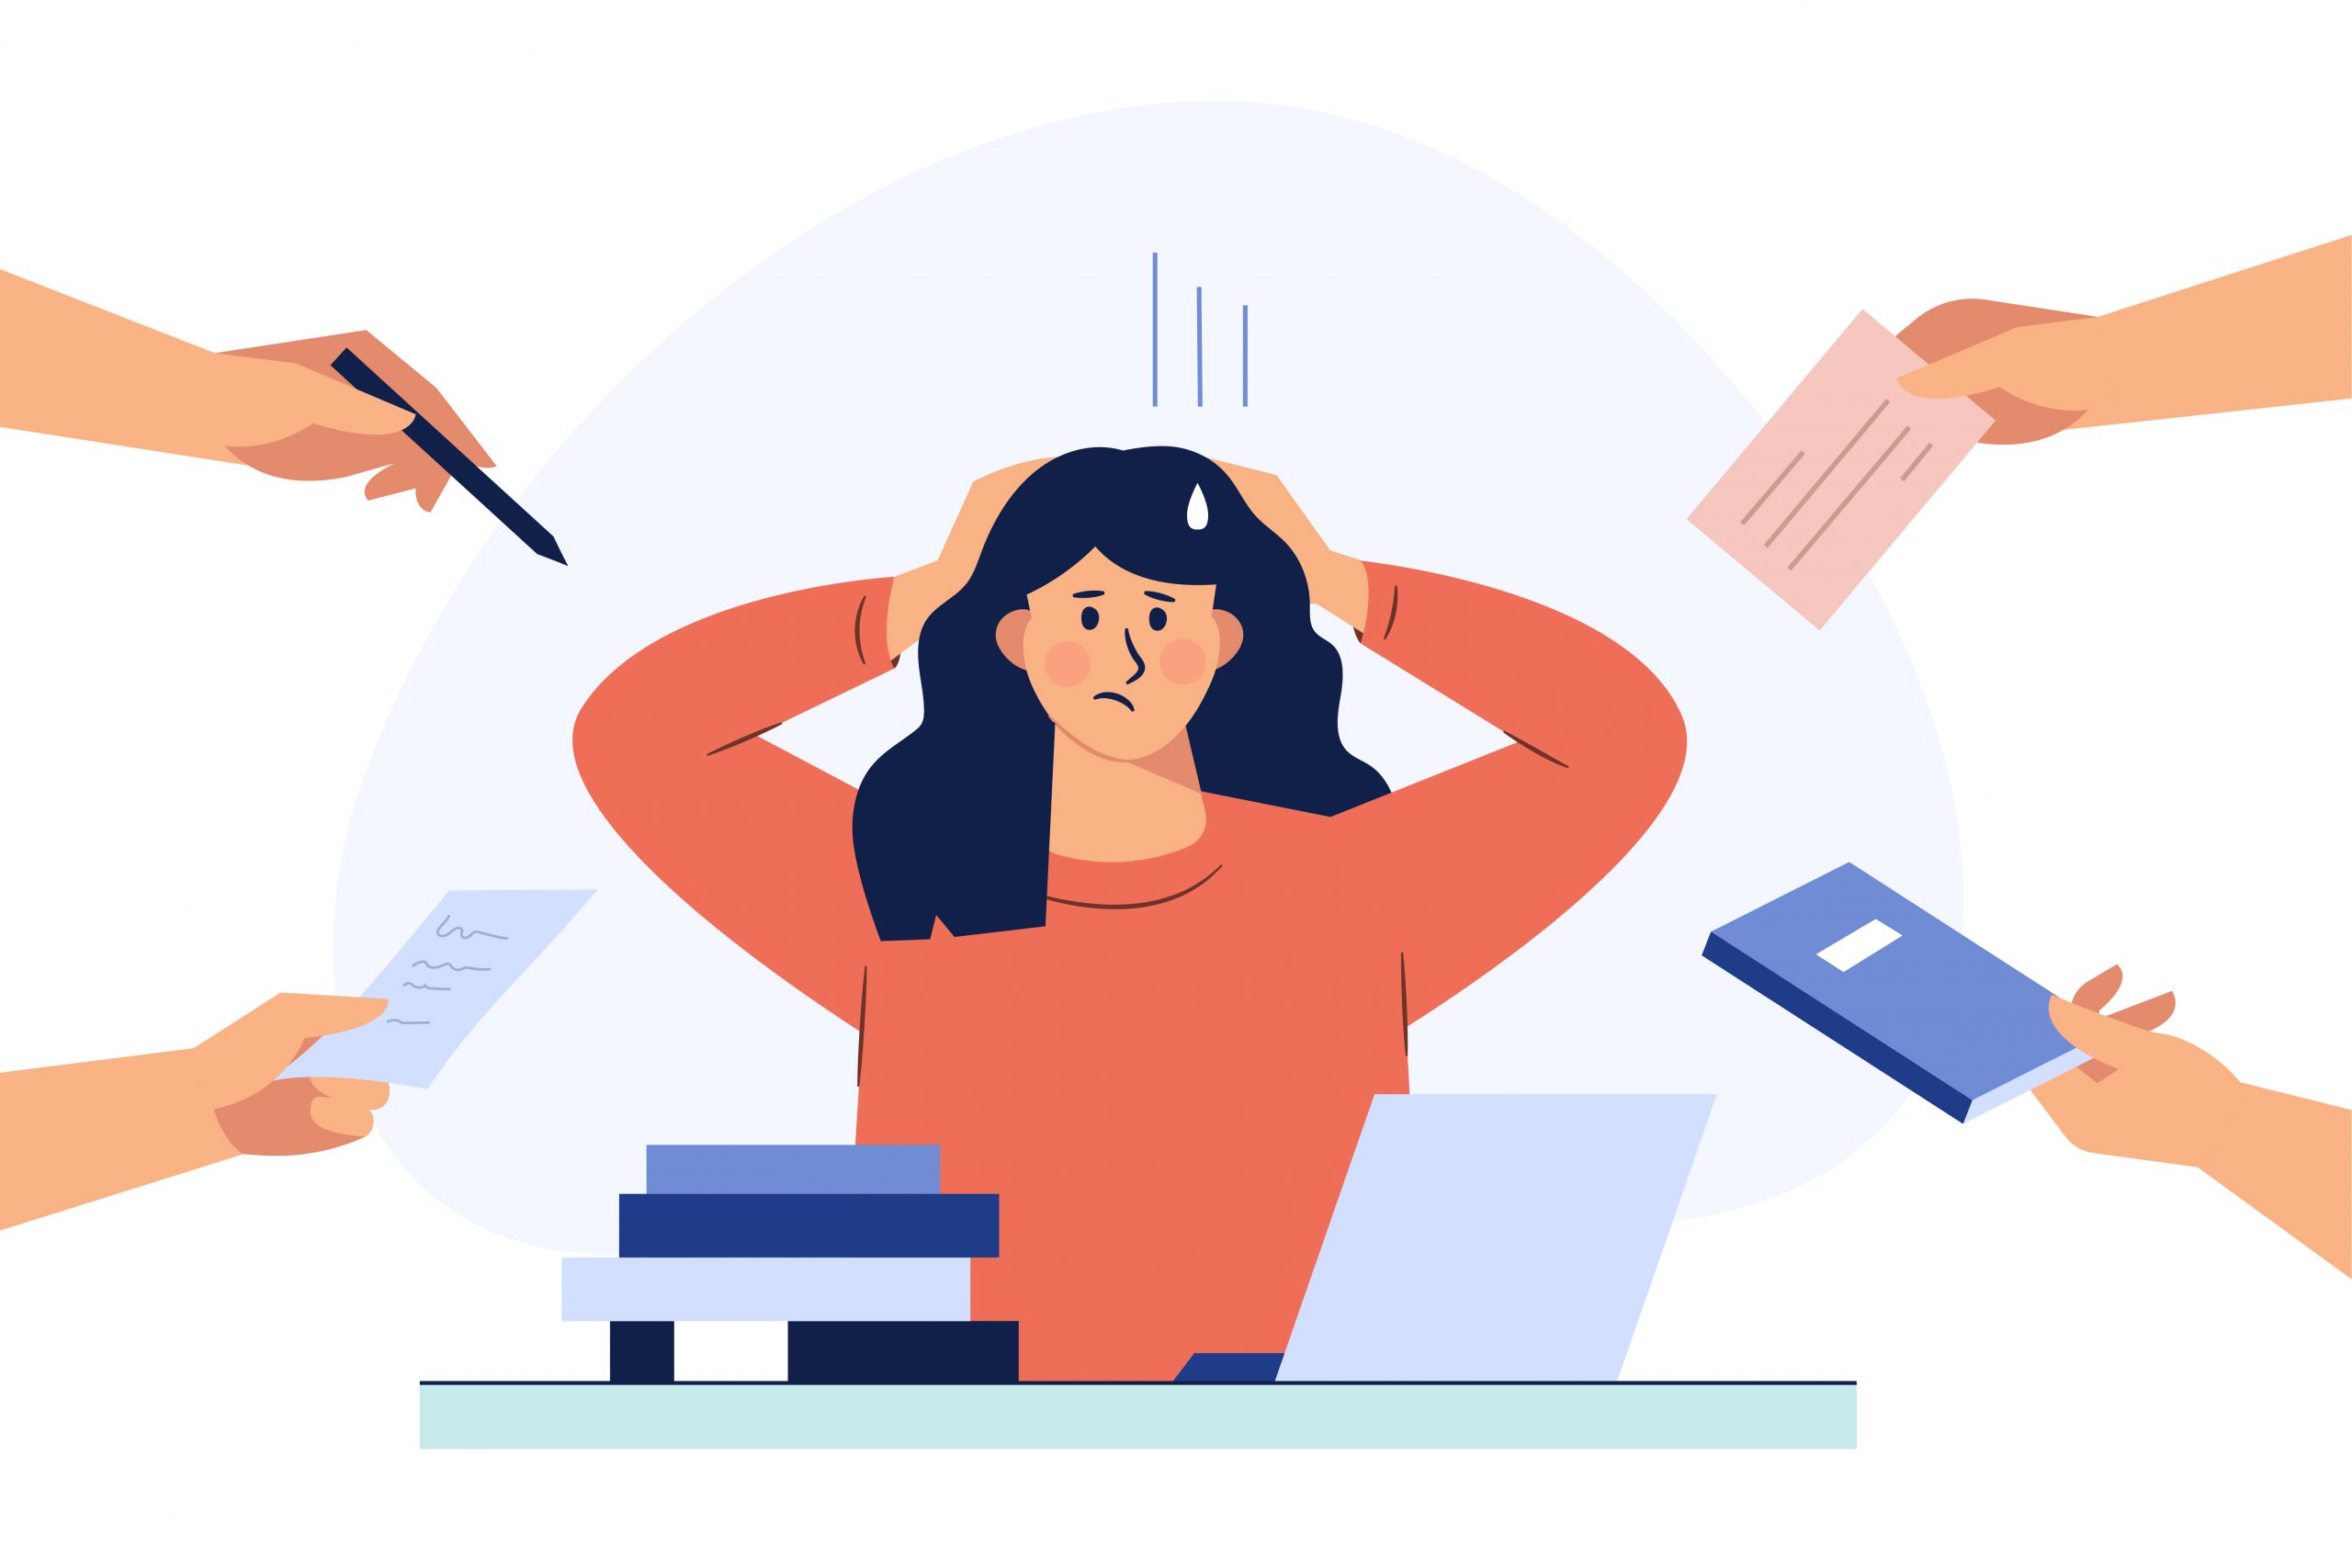 Cartoon of someone overwhelmed with many tasks